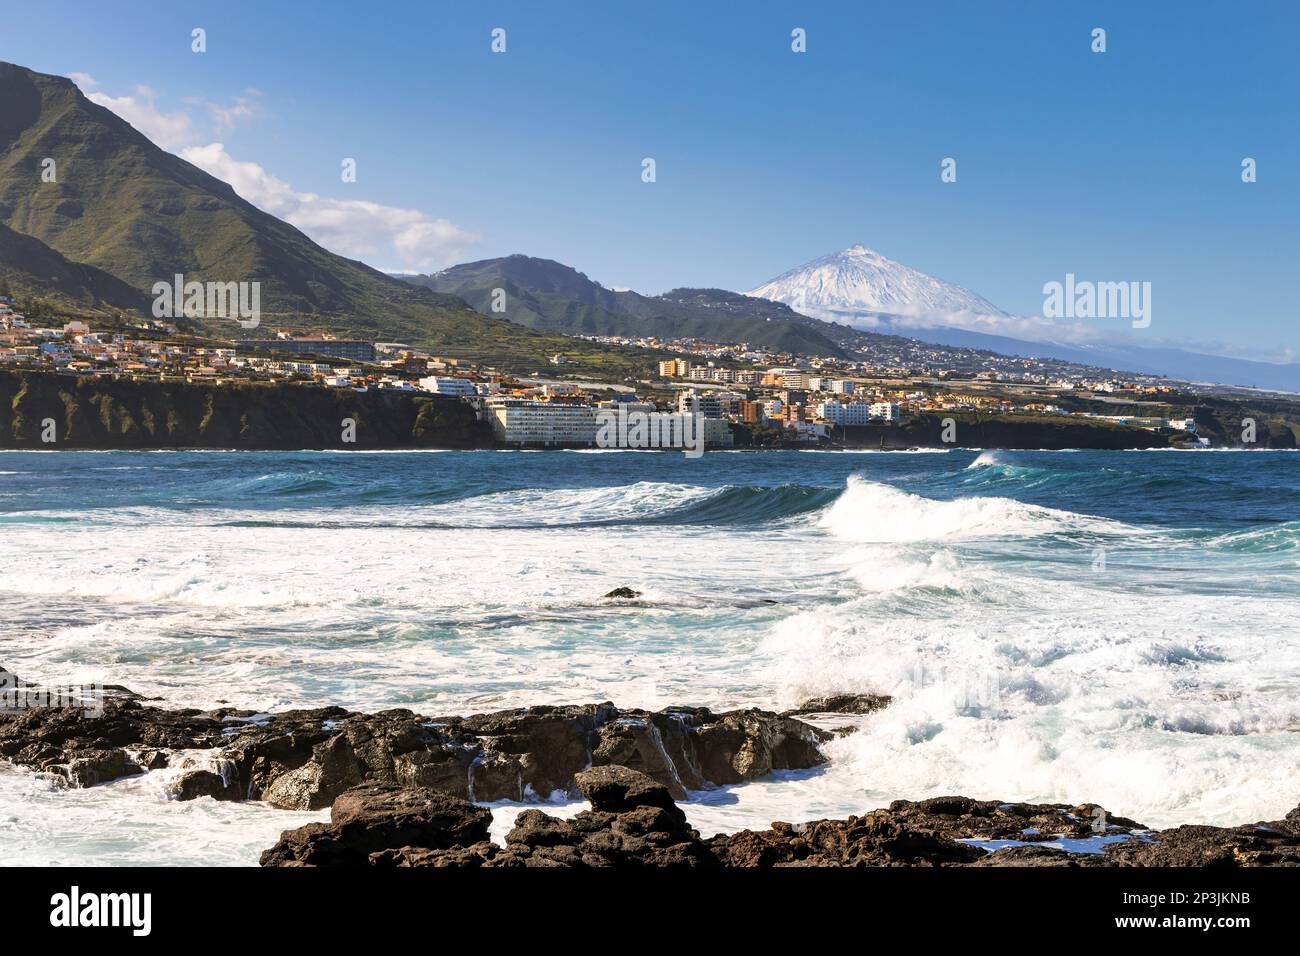 Coast of Punta del Hidalgo in Tenerife with the coastal town of Bajamar and Mount Teide in the background. Stock Photo